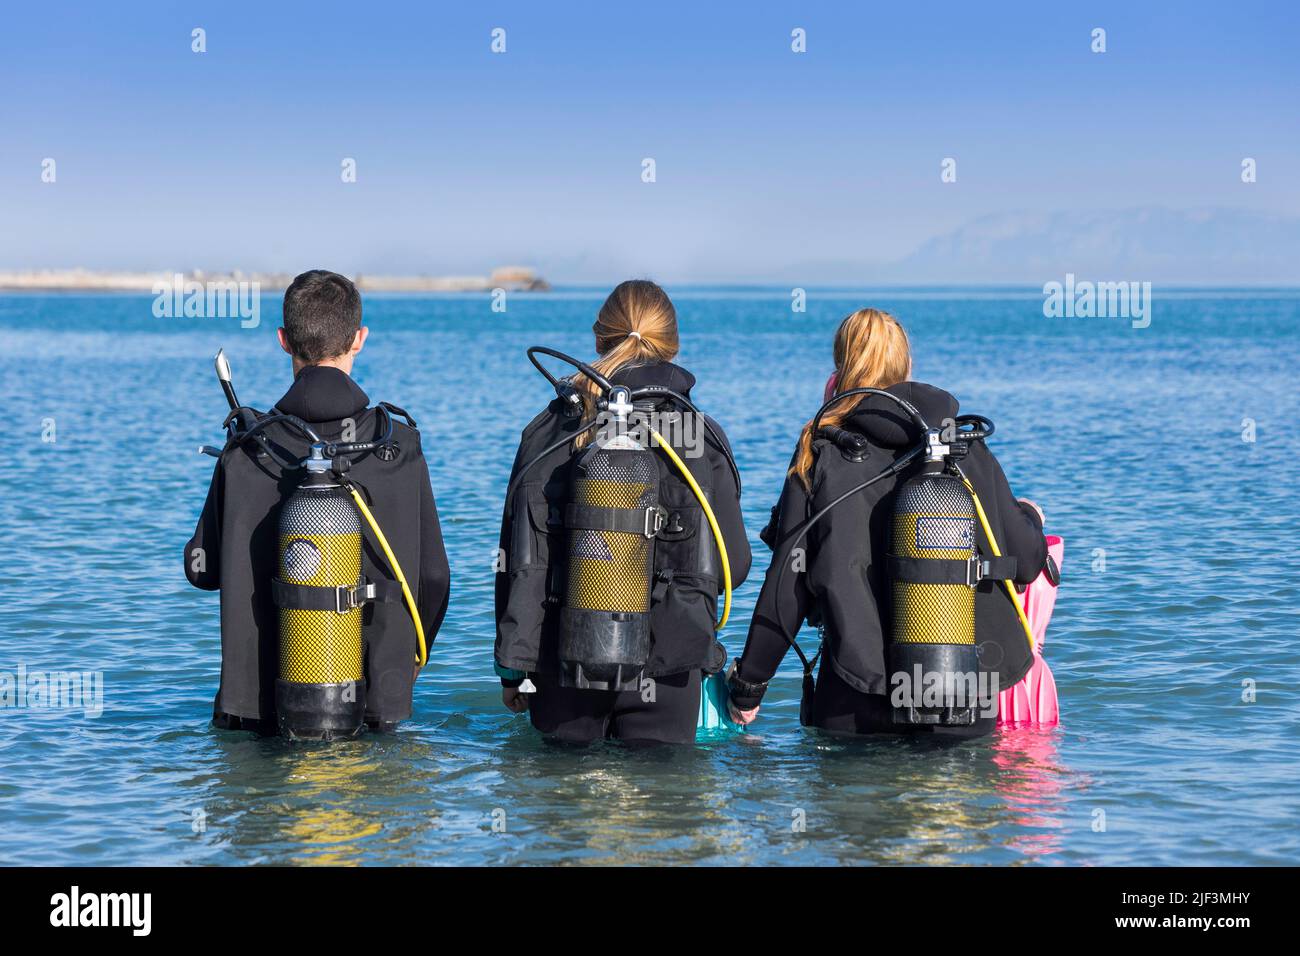 Scuba divers walking into the sea on a shore dive from behind Stock Photo